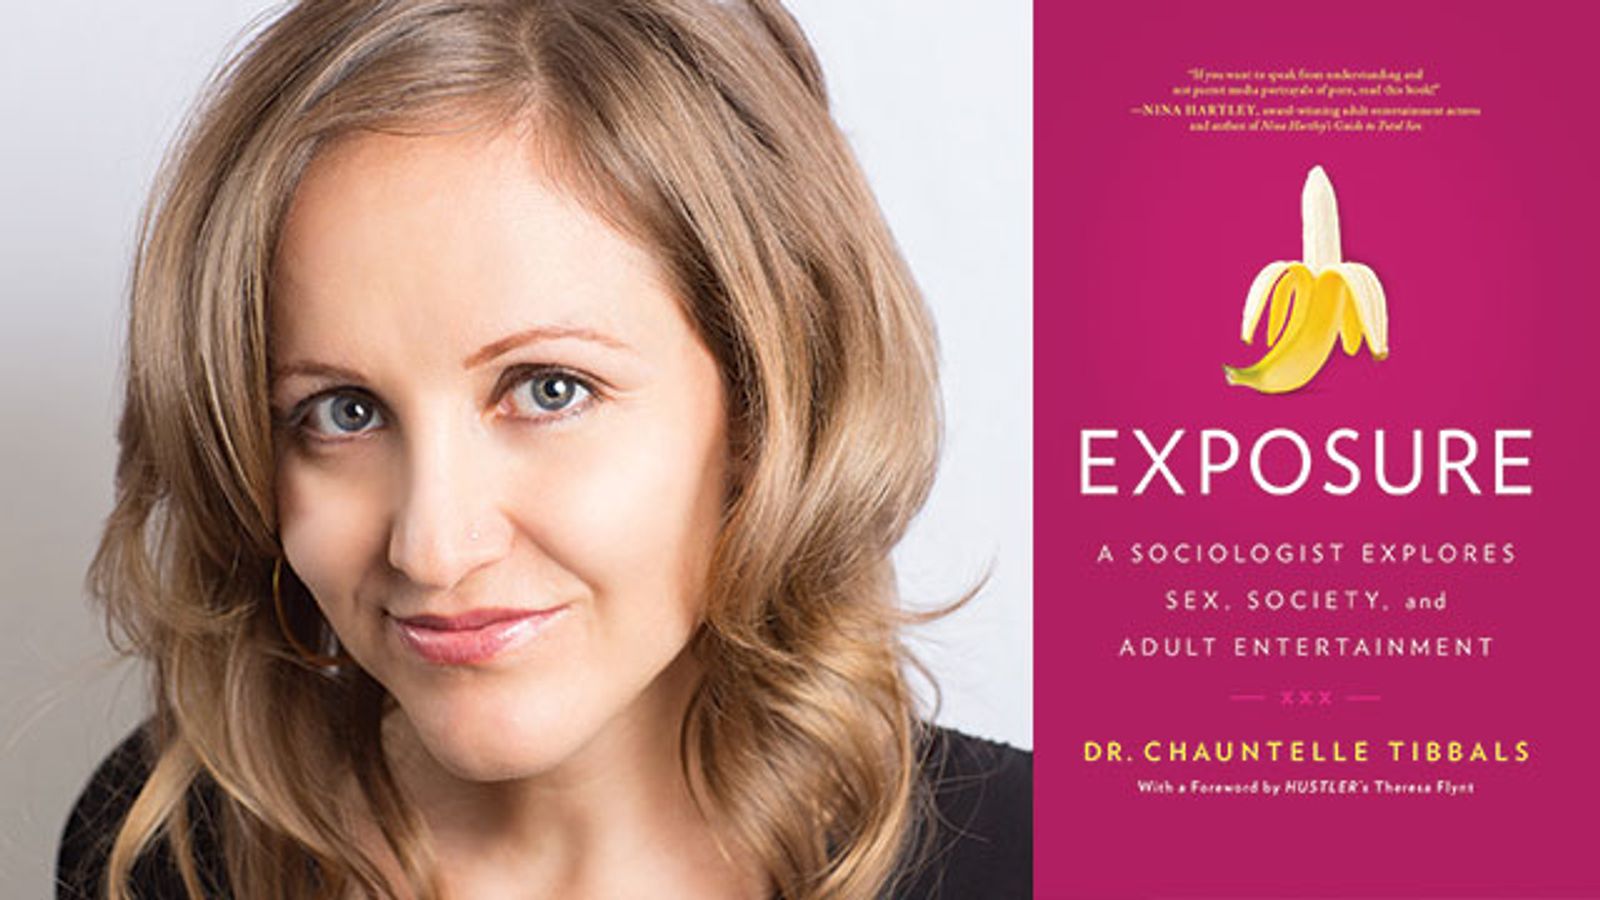 Book Review: Expose Yourself to Dr. Chauntelle Tibbals